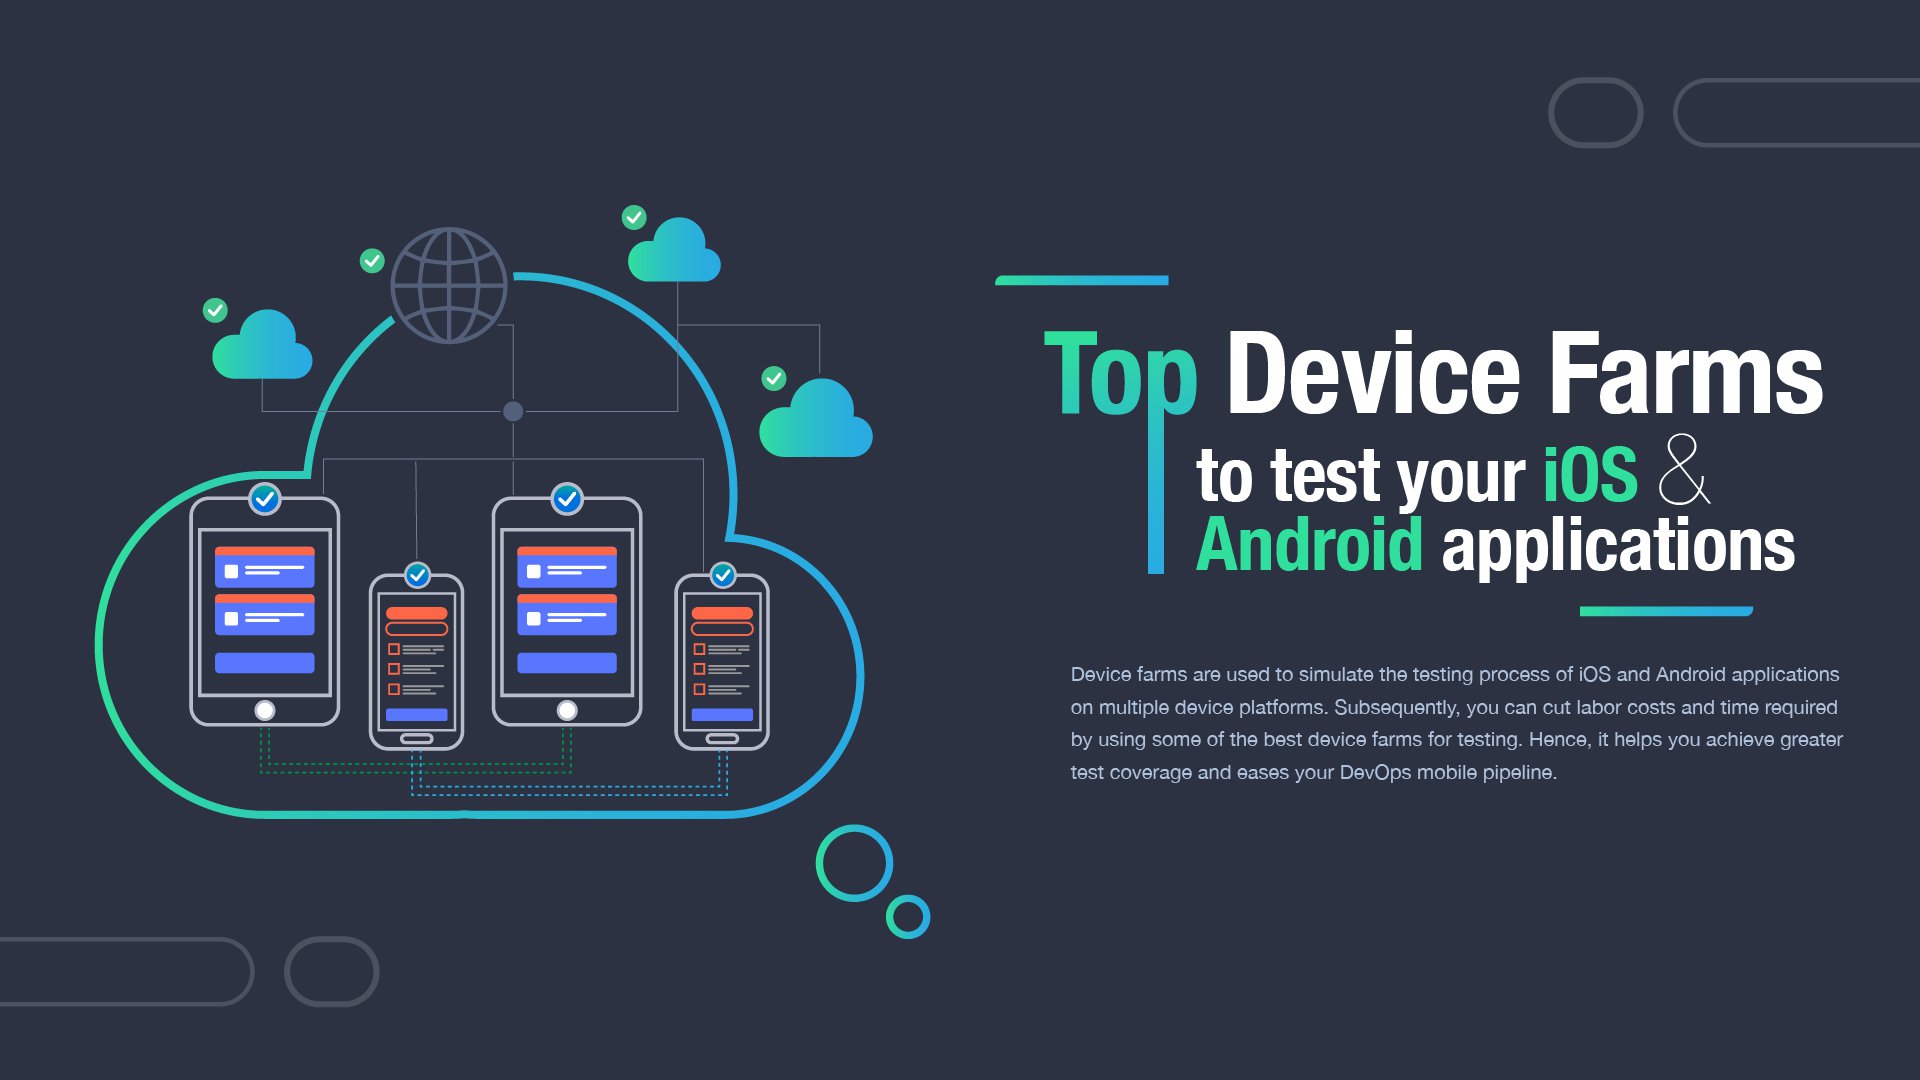 Top Device Farms to test your iOS and Android applications cover